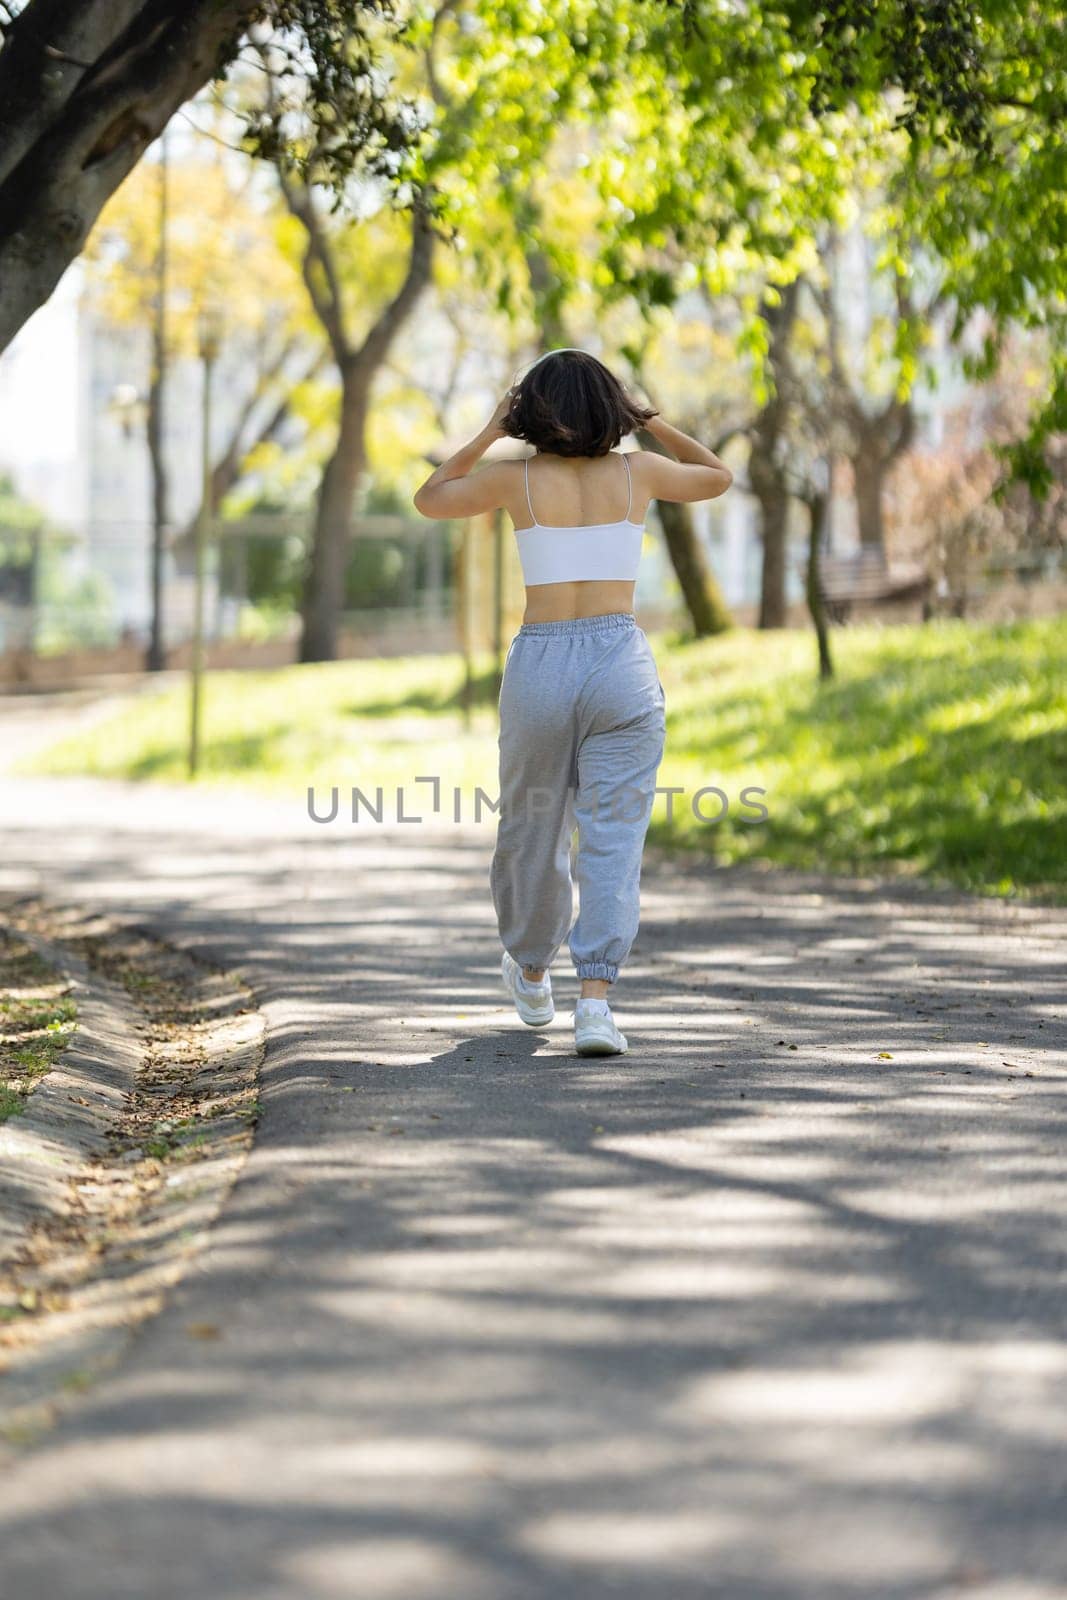 A woman is walking down a path in a park. She is wearing headphones and has her hands on her head. The scene is peaceful and serene, with the woman enjoying her walk in the park